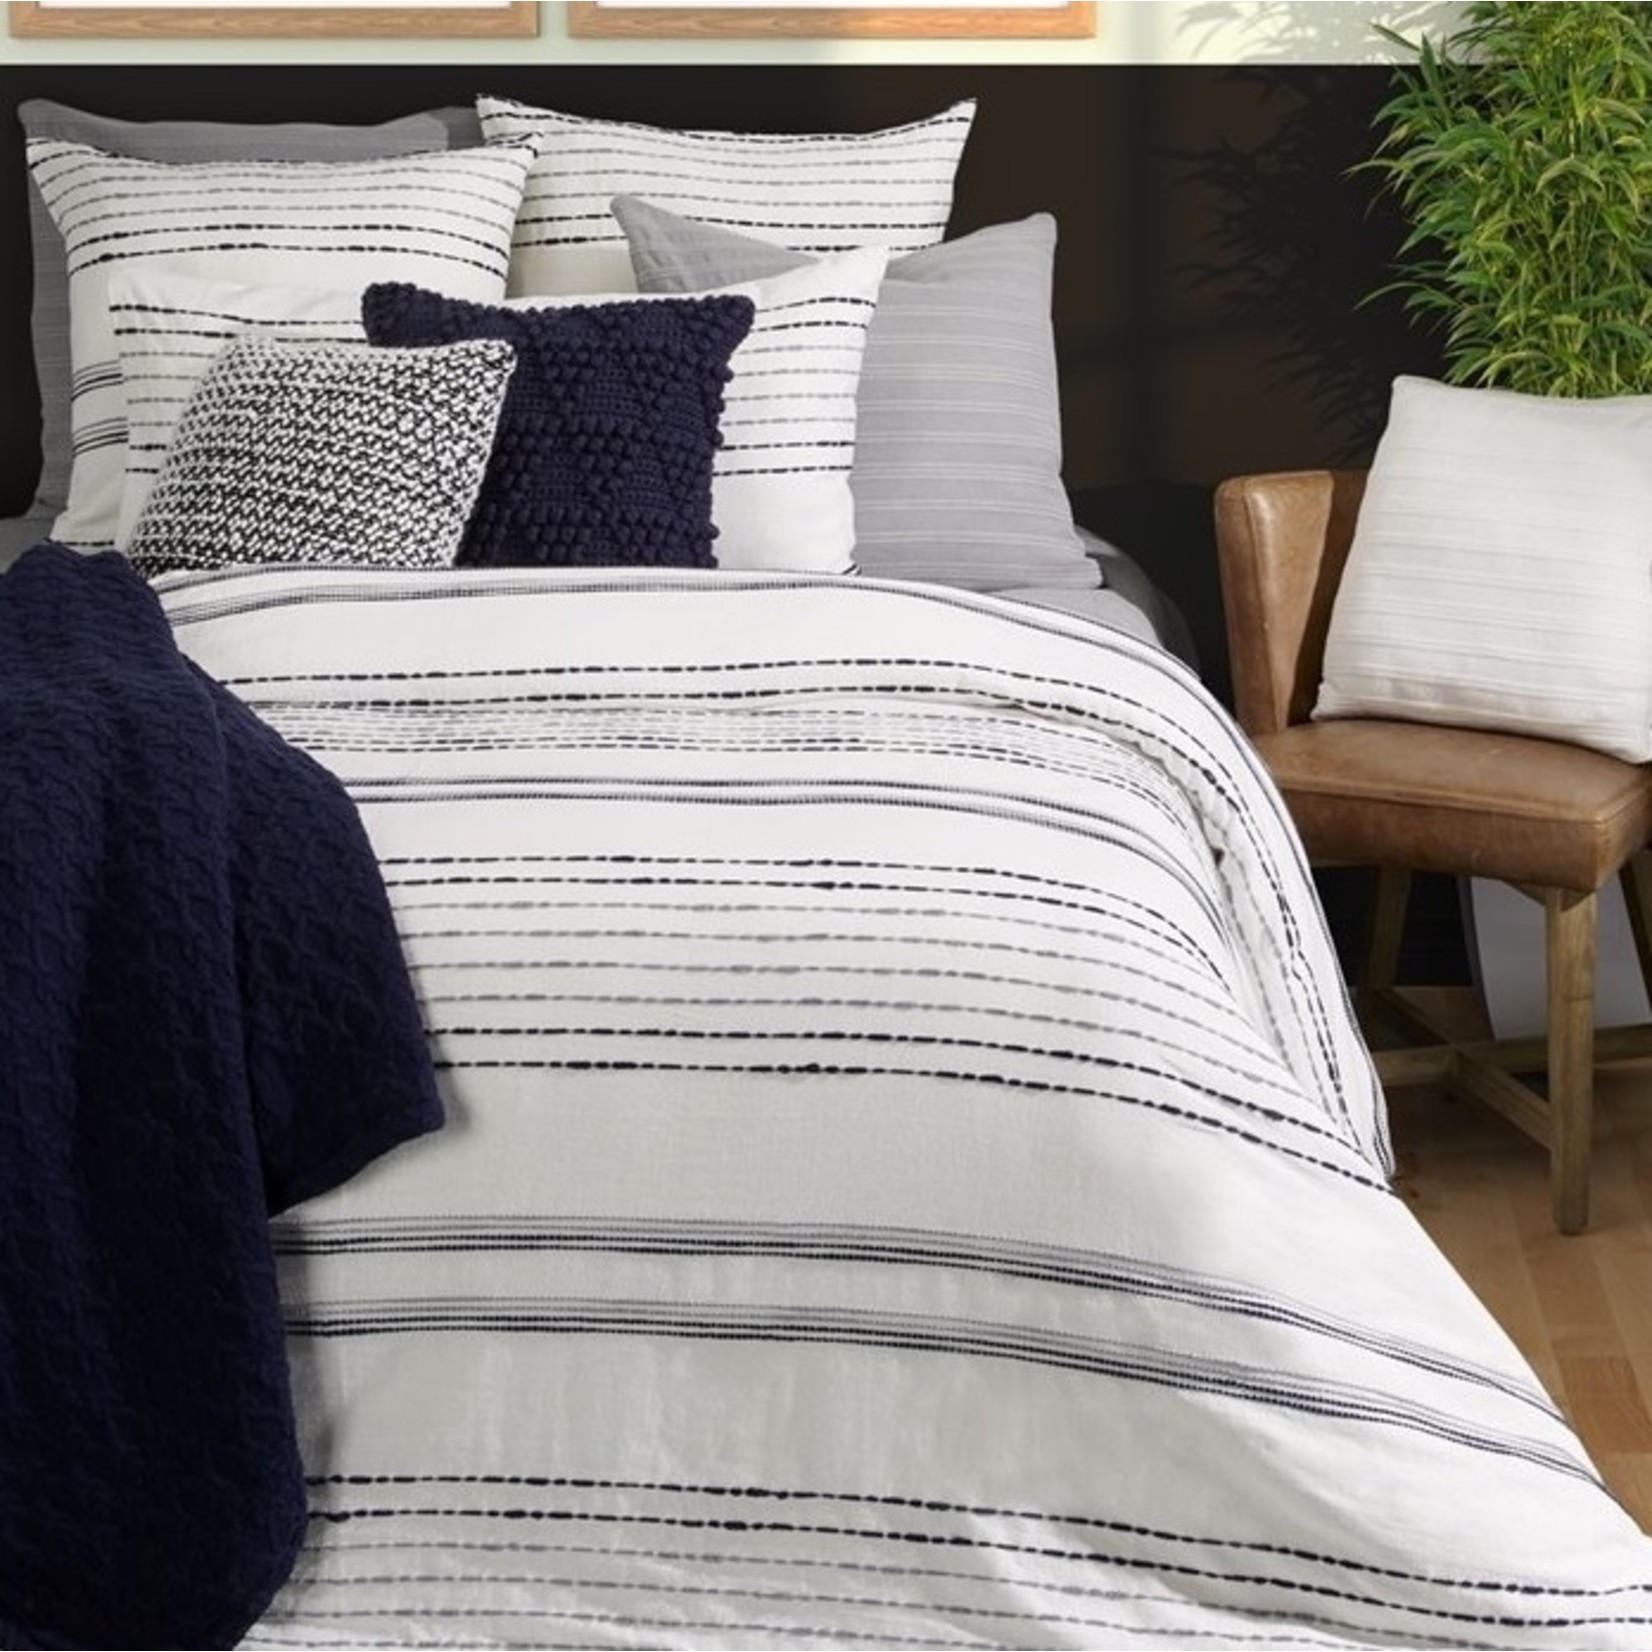 Brunelli Jeremy Queen  Duvet Cover and Shams